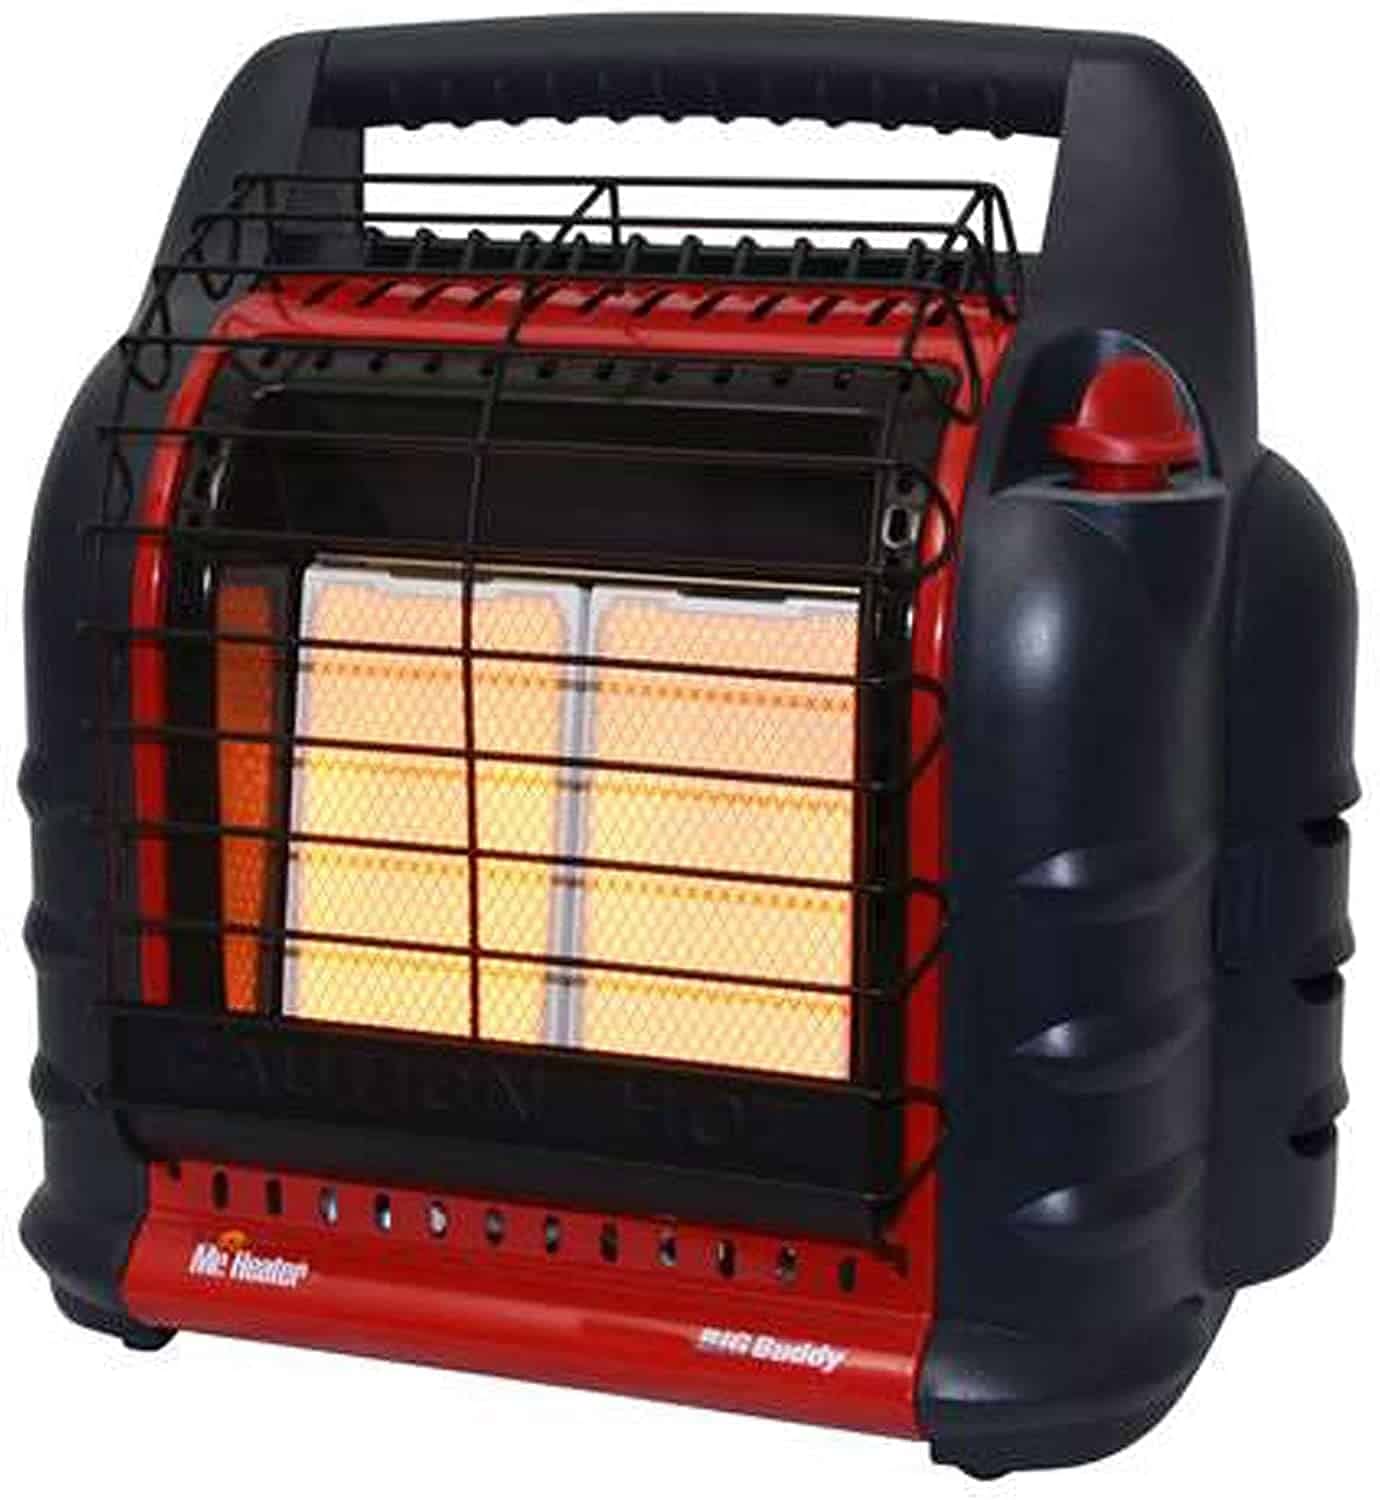 Mr. Heater Big Buddy Indoor/Outdoor Portable Propane Heater - Millie Copper Mr Buddy Propane Heater Won't Stay Lit